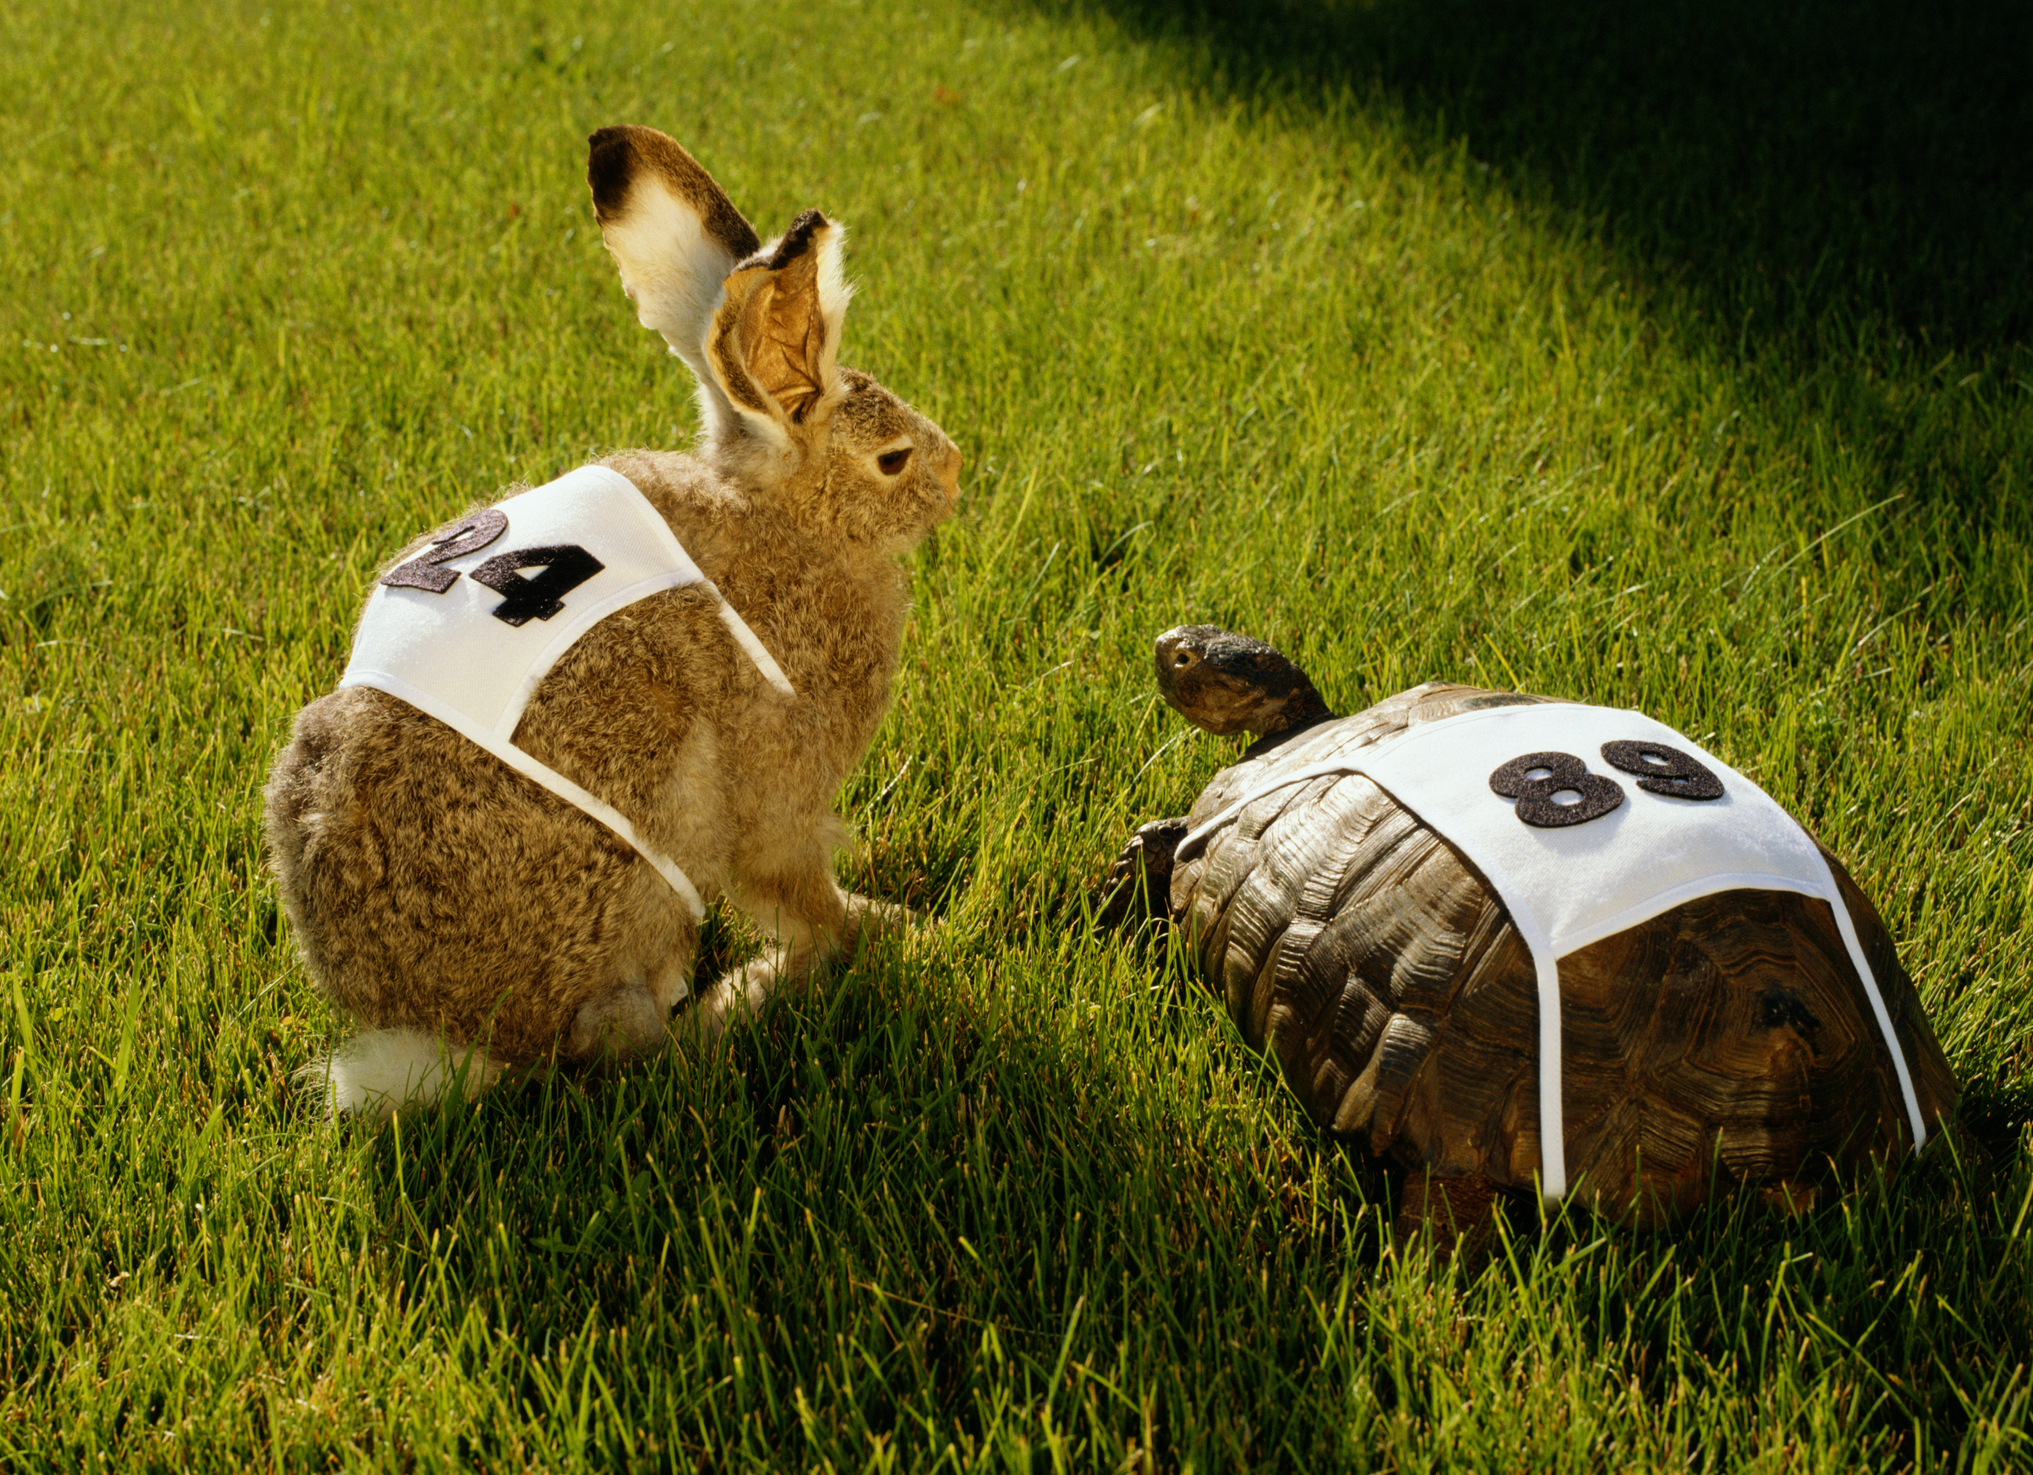 HARE & TORTOISE WITH RACE NUMBERS ON GRASS